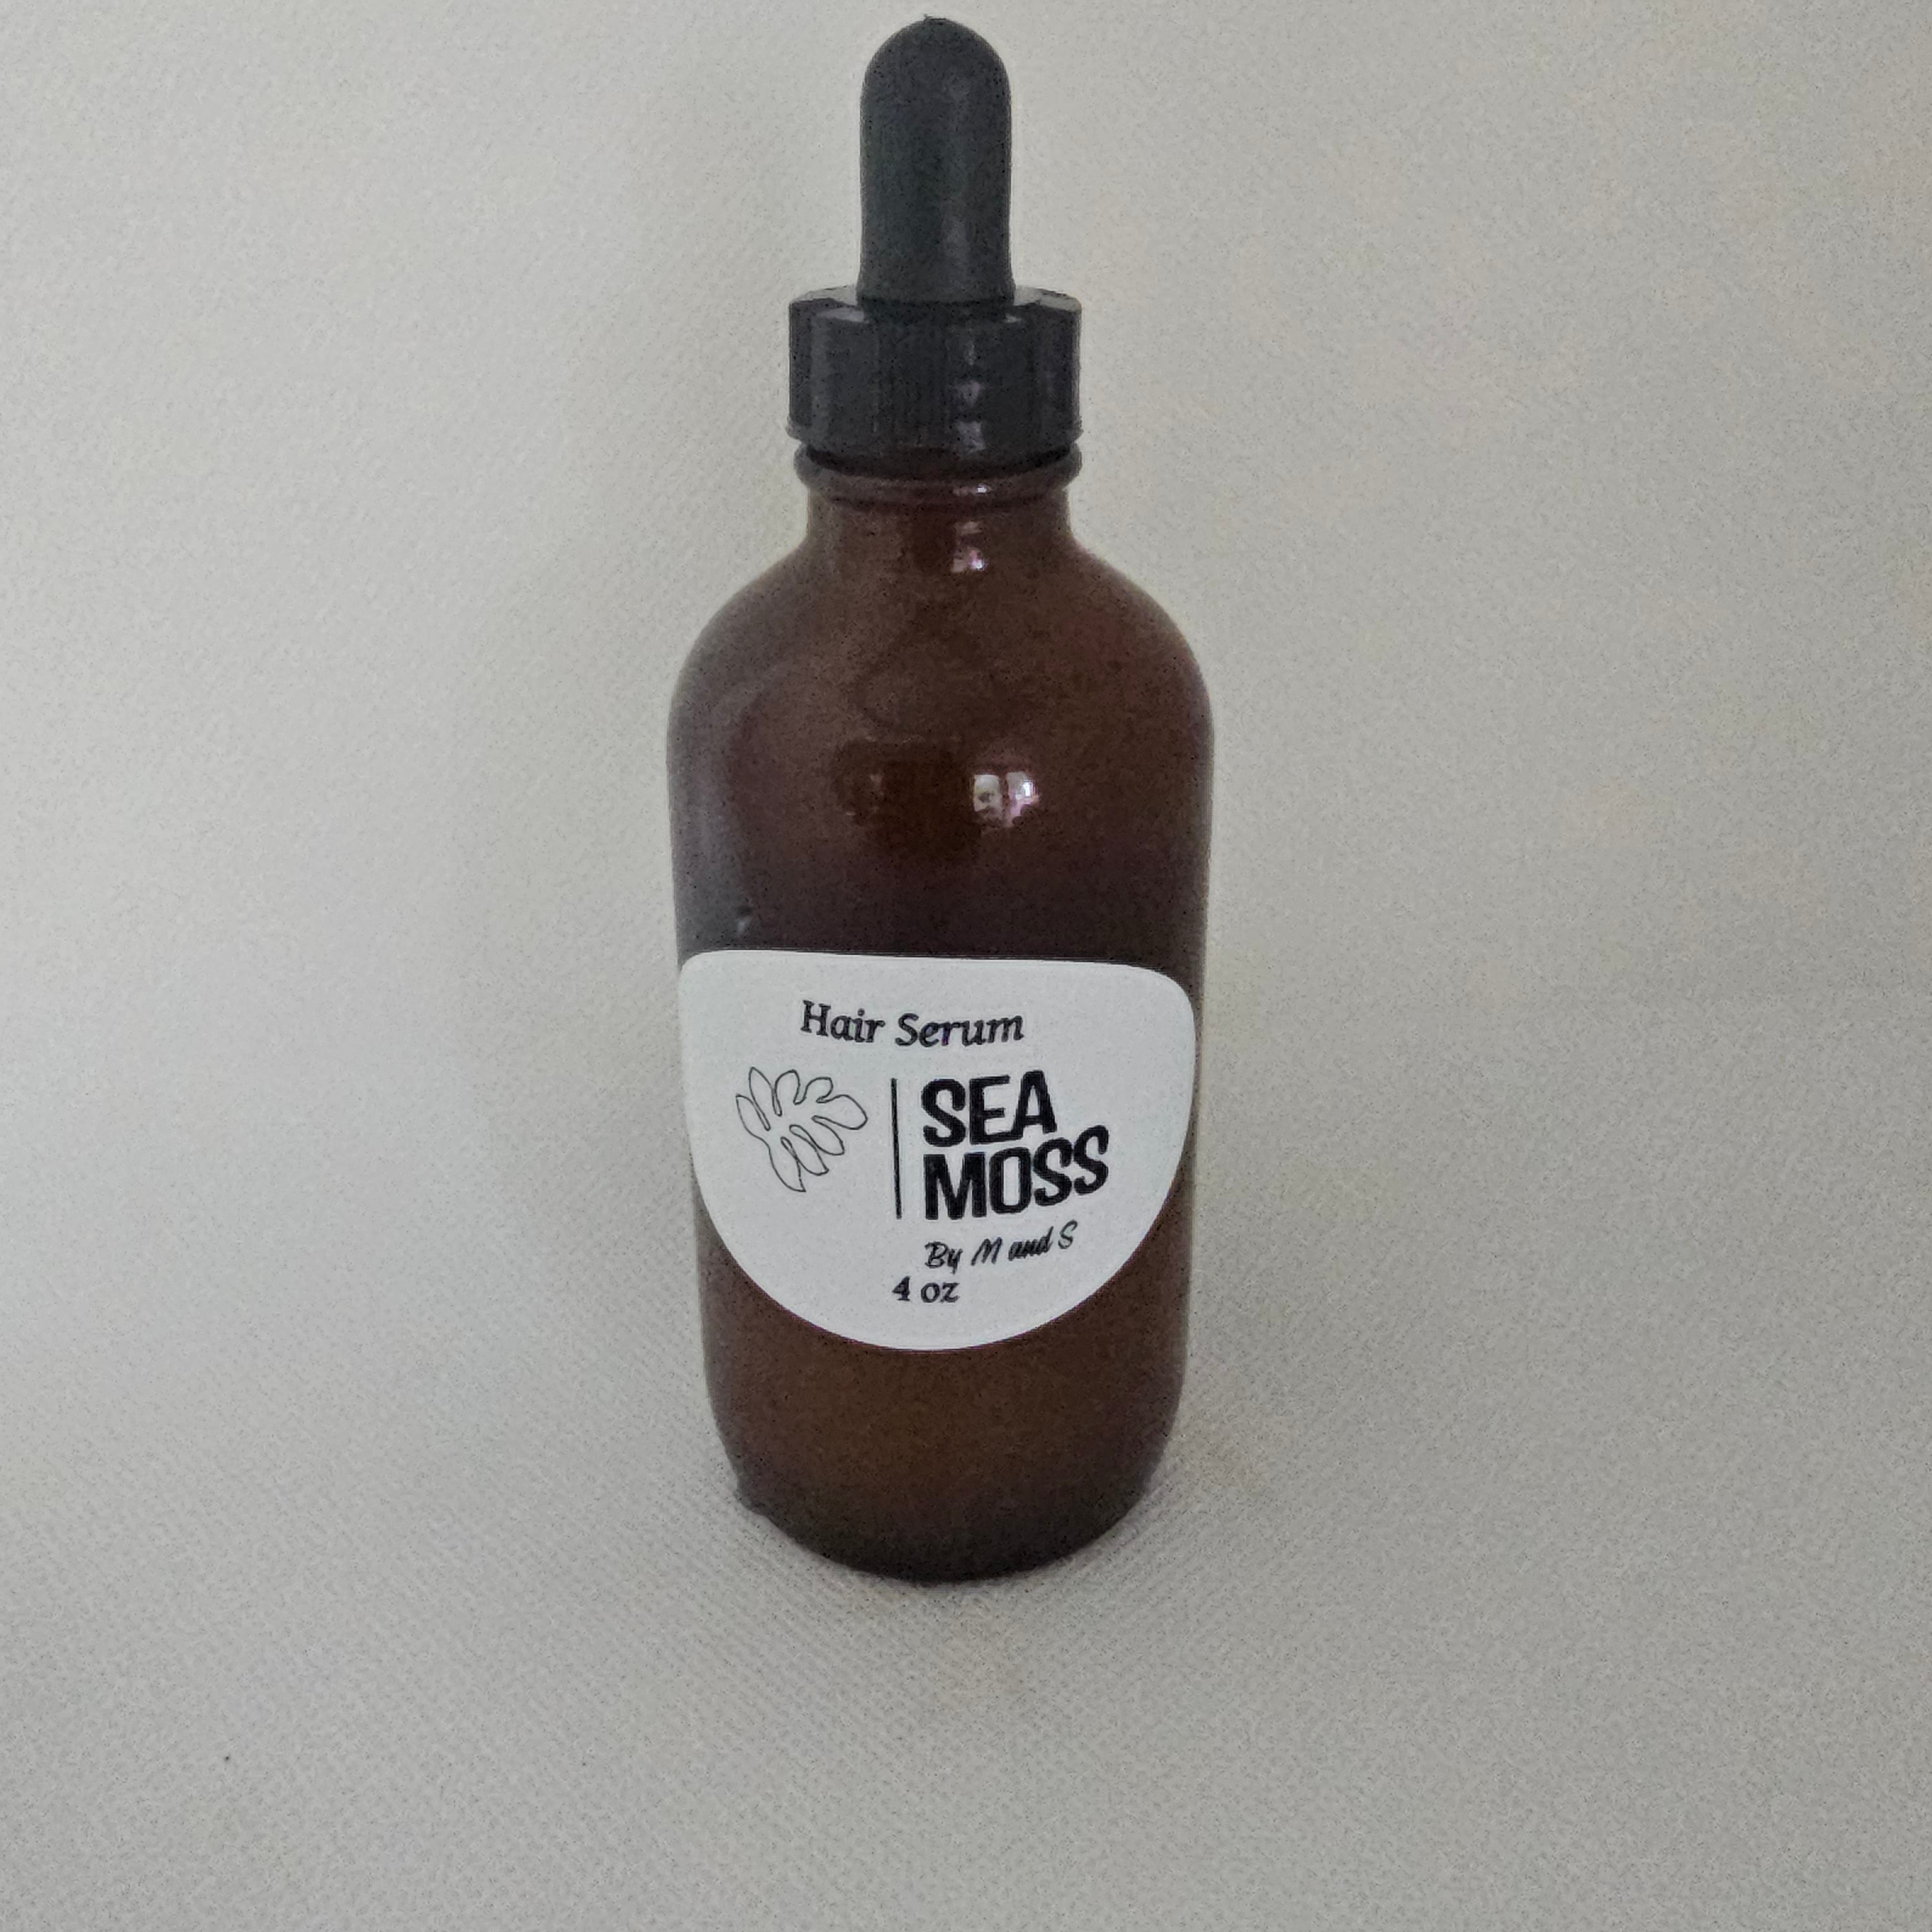 Hair Serum - Sea Moss – SEA MOSS BY M AND S